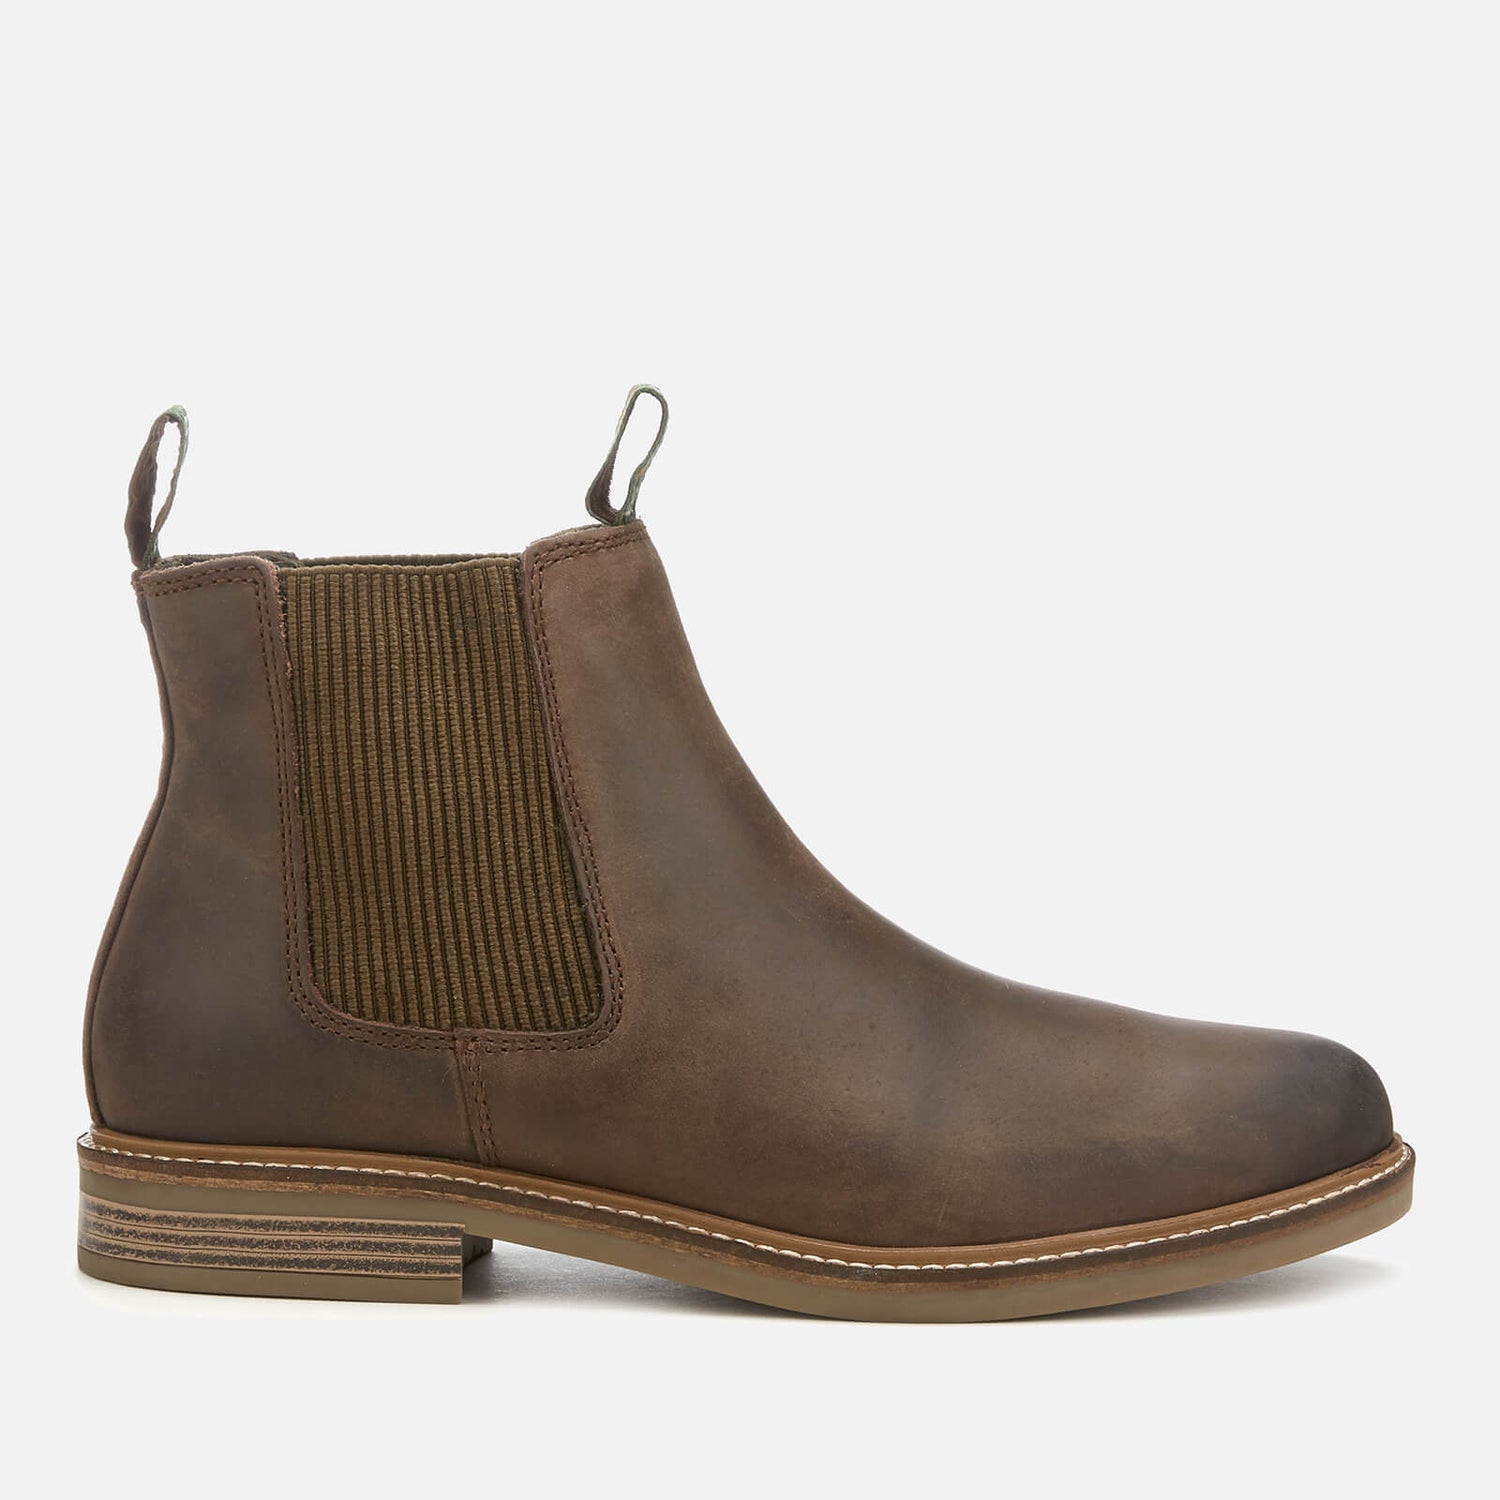 Barbour Men's Farsley Leather Chelsea Boots - Choco - UK 7